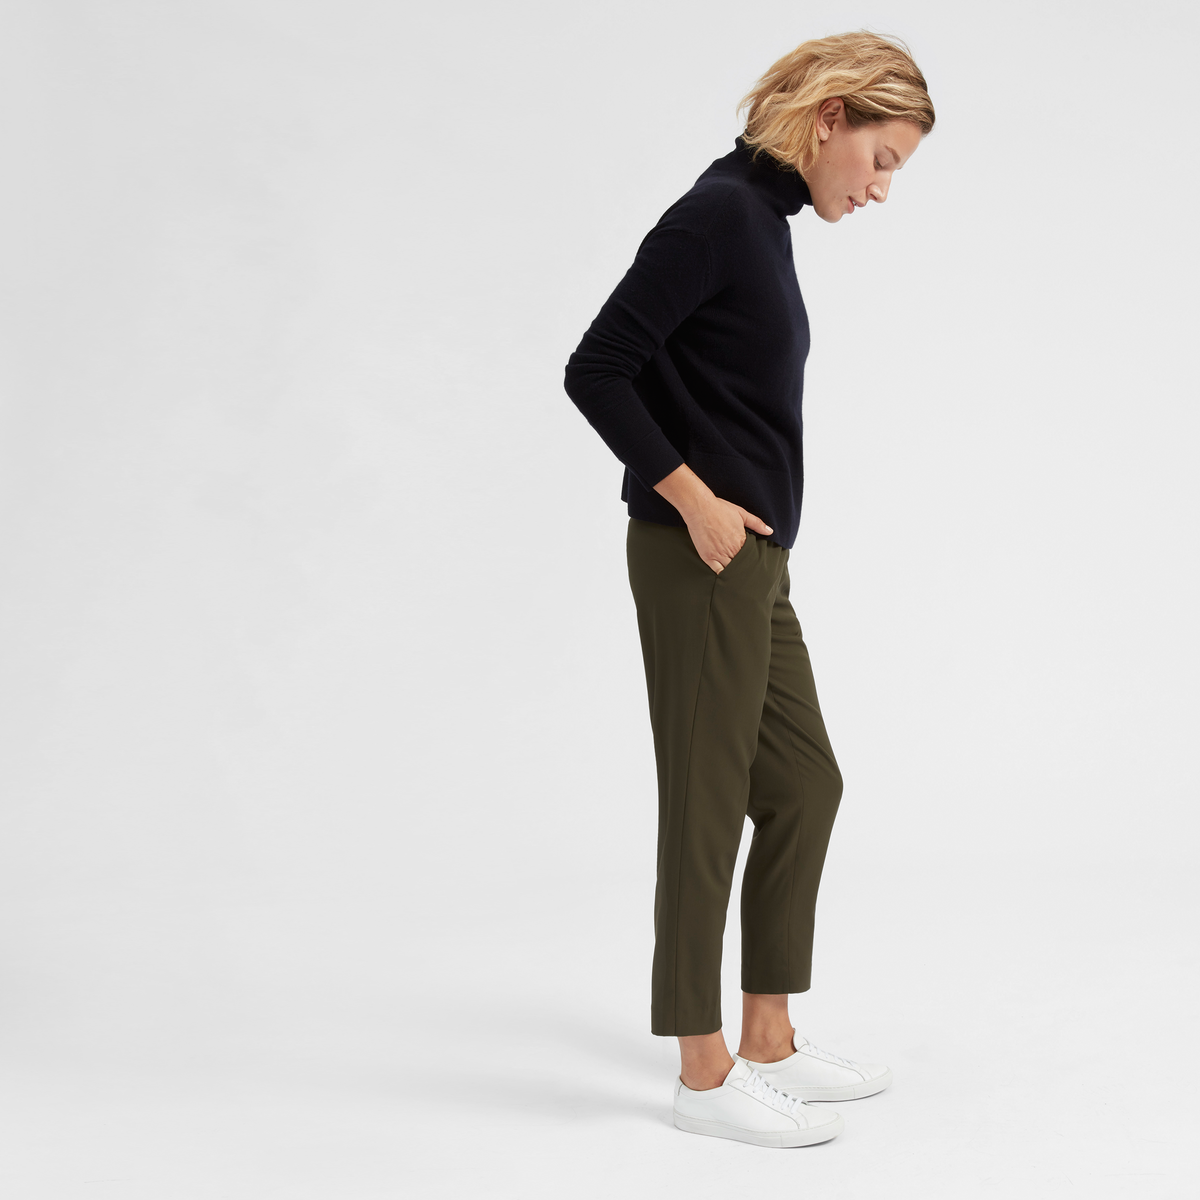 https://welcomeobjects.com/wp-content/uploads/2018/01/Everlane-GoWeave-Pants-Modeled-Side.png